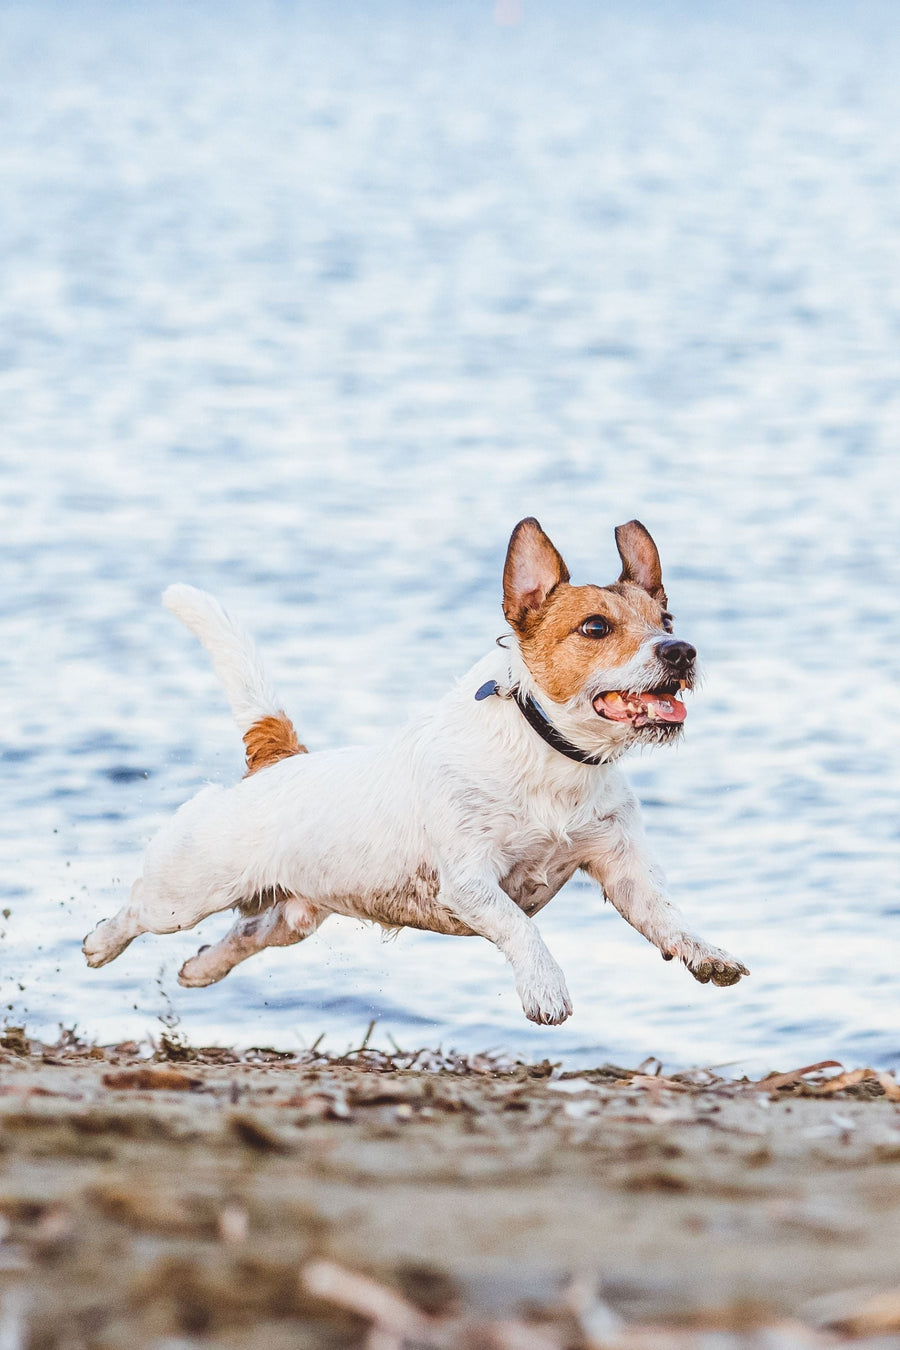 Equipment for dogs with a strong predatory drive shows a jack russell terrier running along the beach in pursuit of a bird that is off-screen.